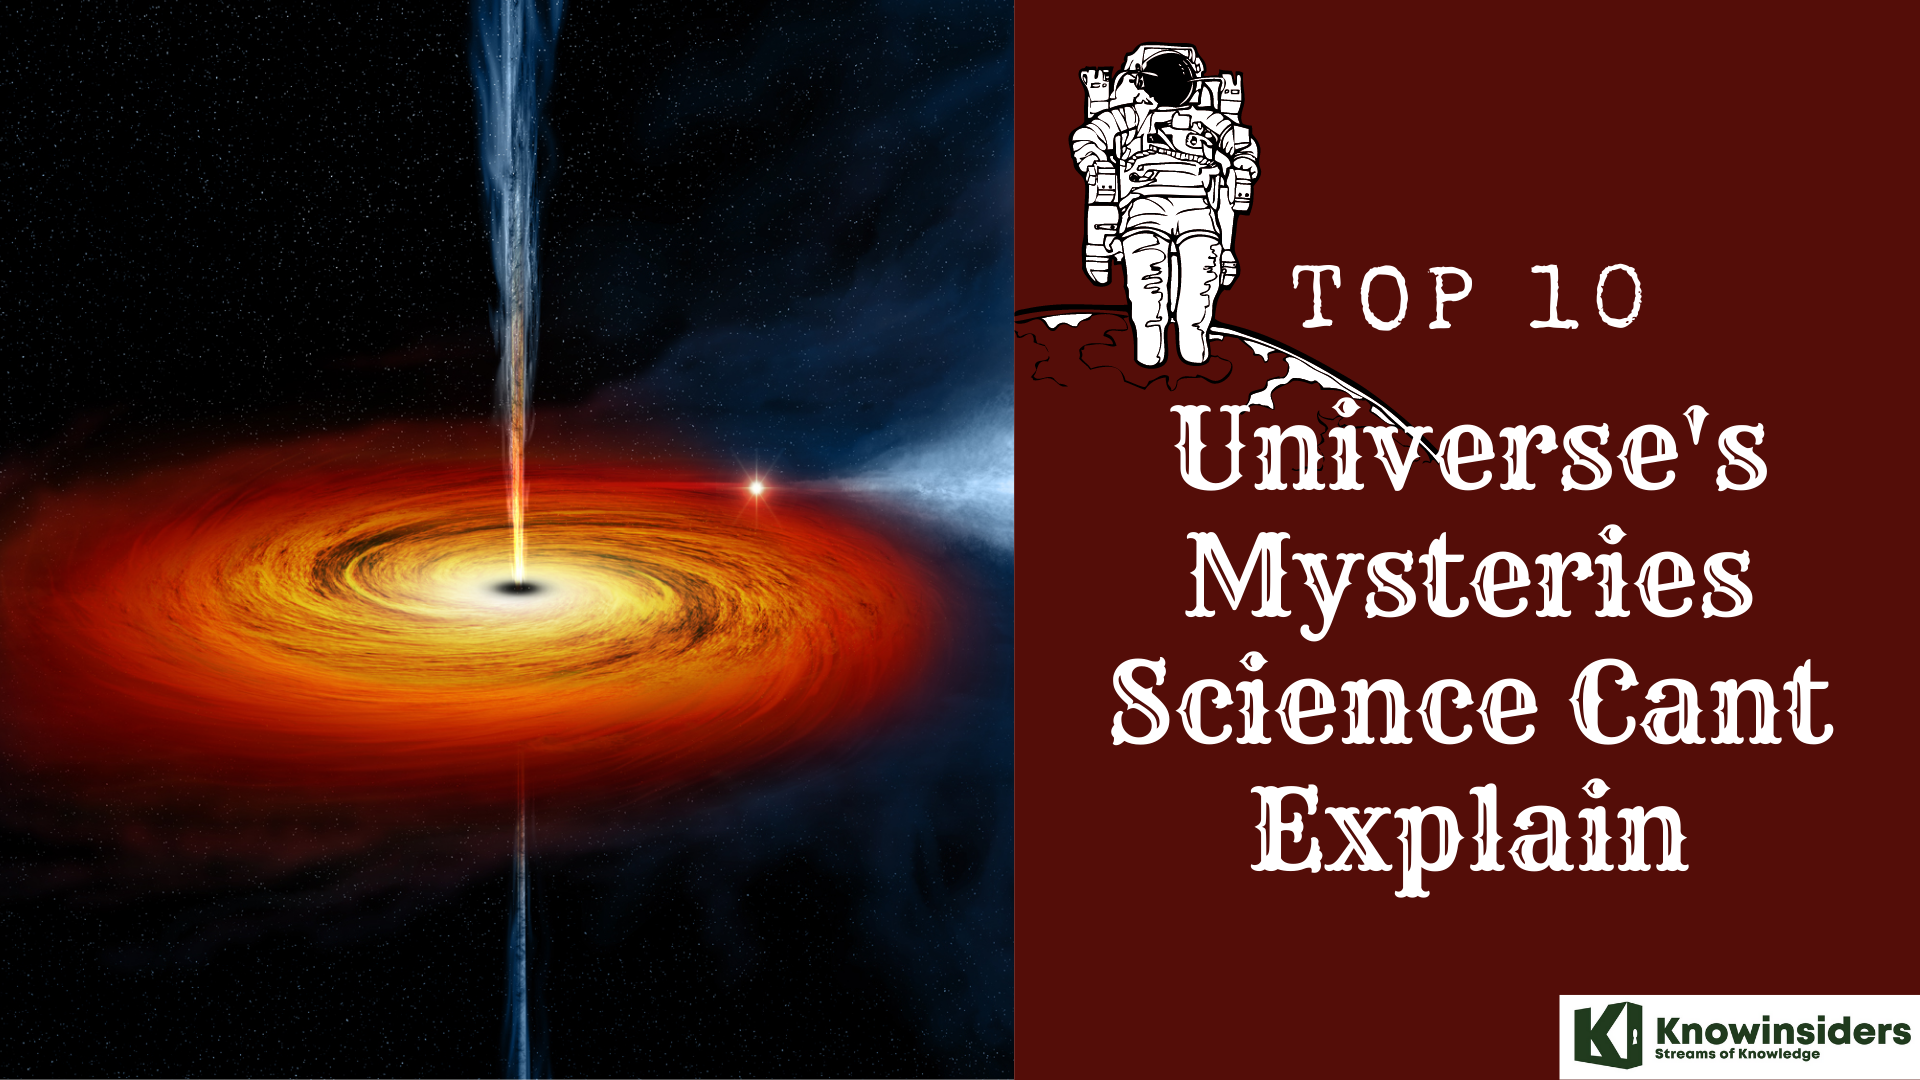 Top 10 Universe's Mysteries that Science Cant Explain